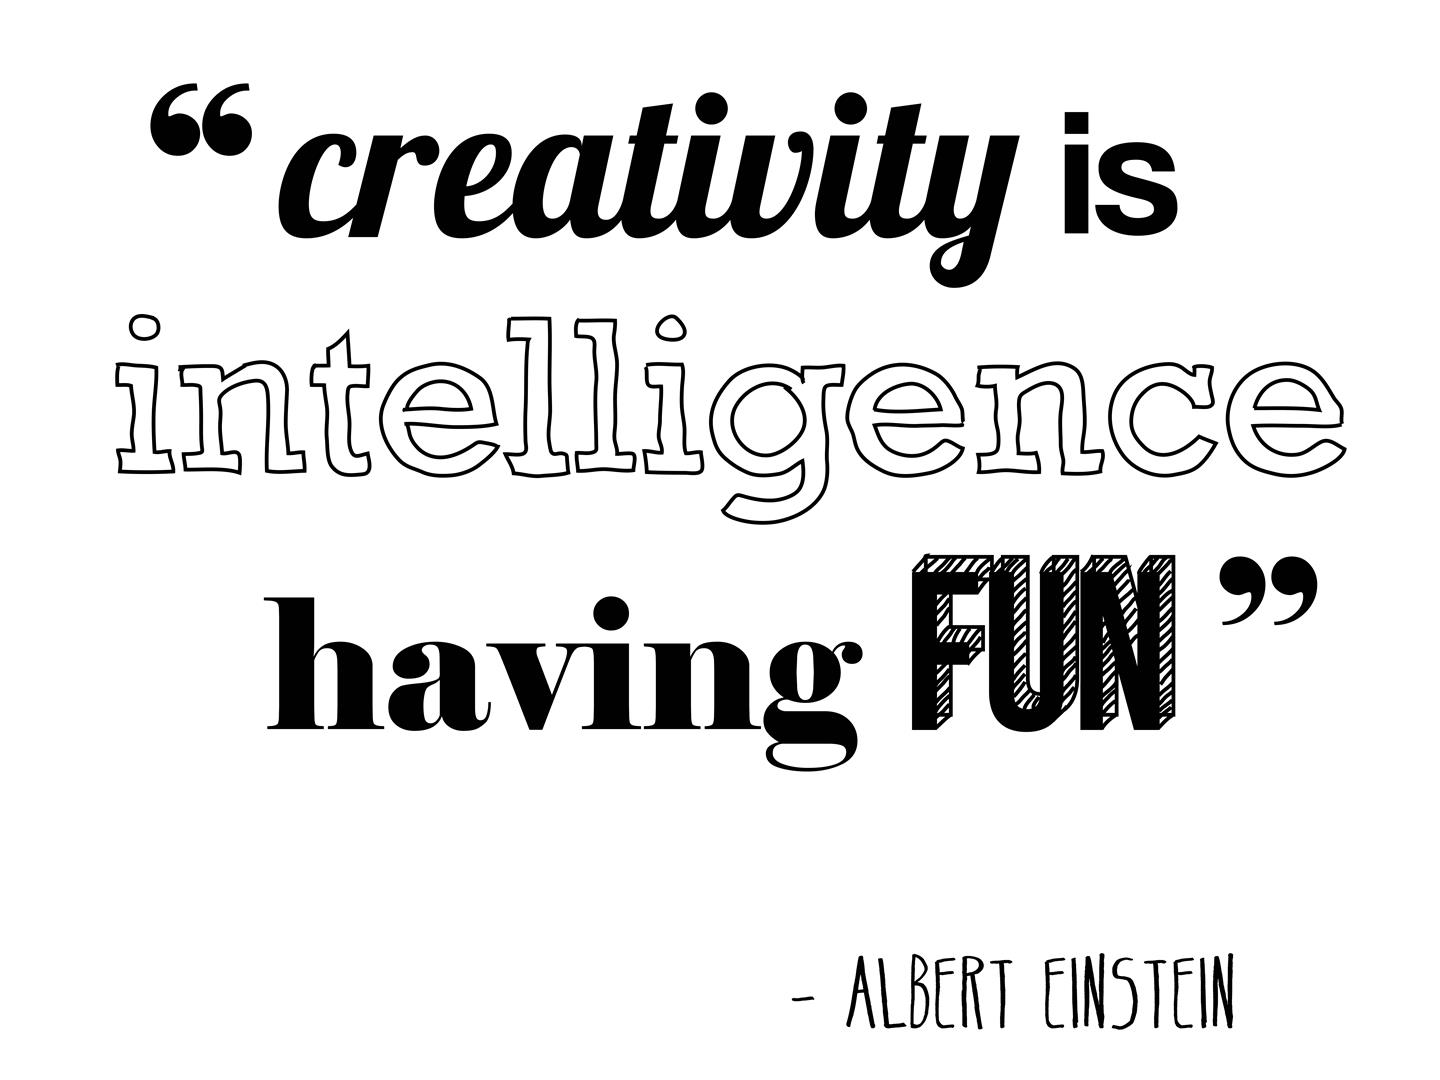 creativity in education quotes